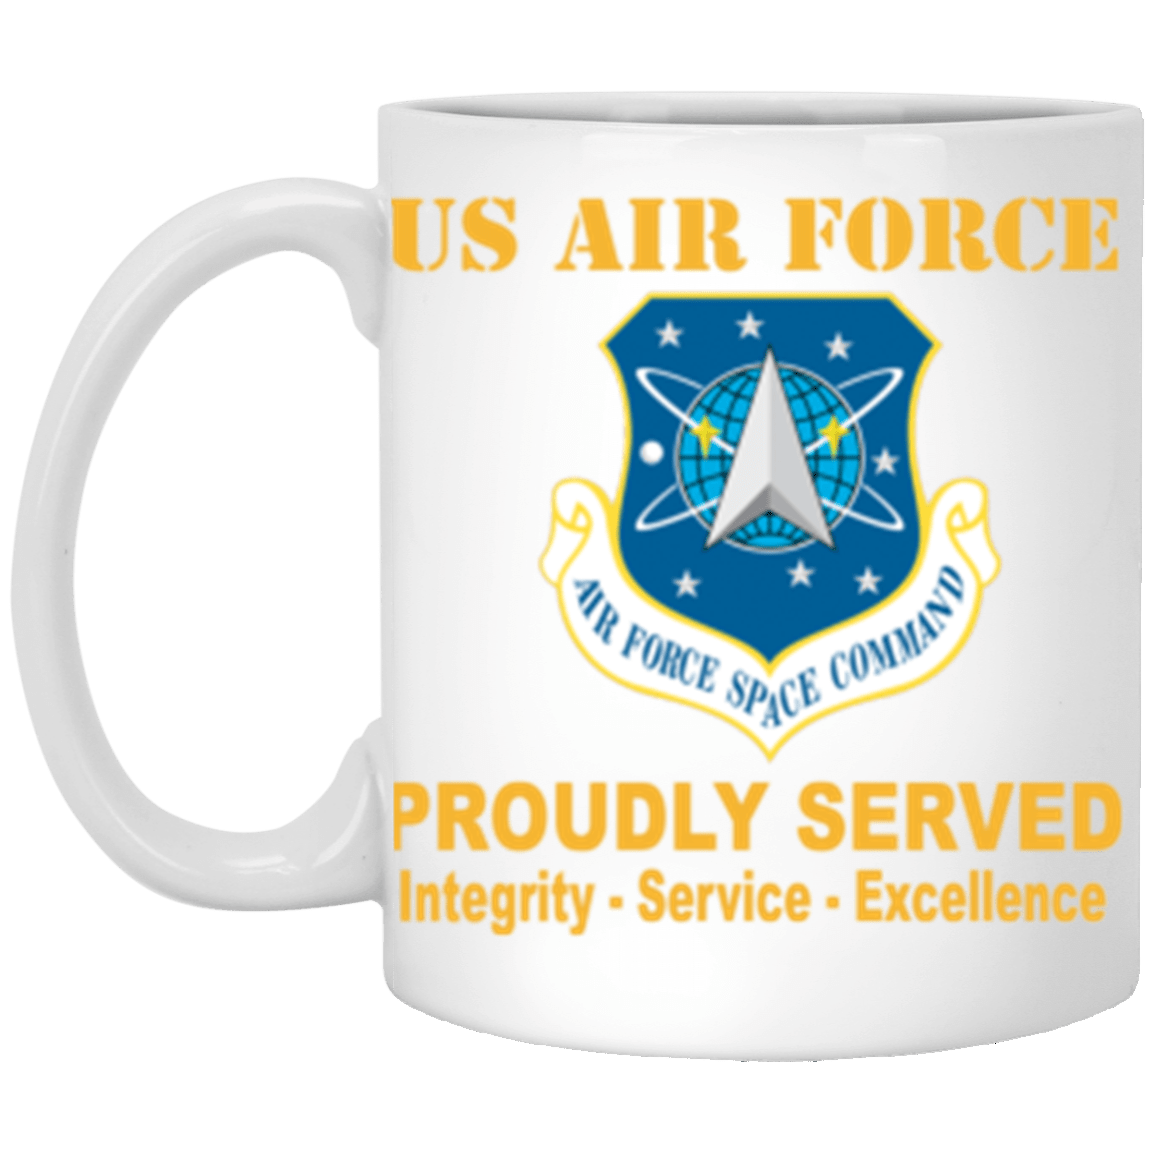 US Air Force Space Command Proudly Served Core Values 11 oz. White Mug-Drinkware-Veterans Nation